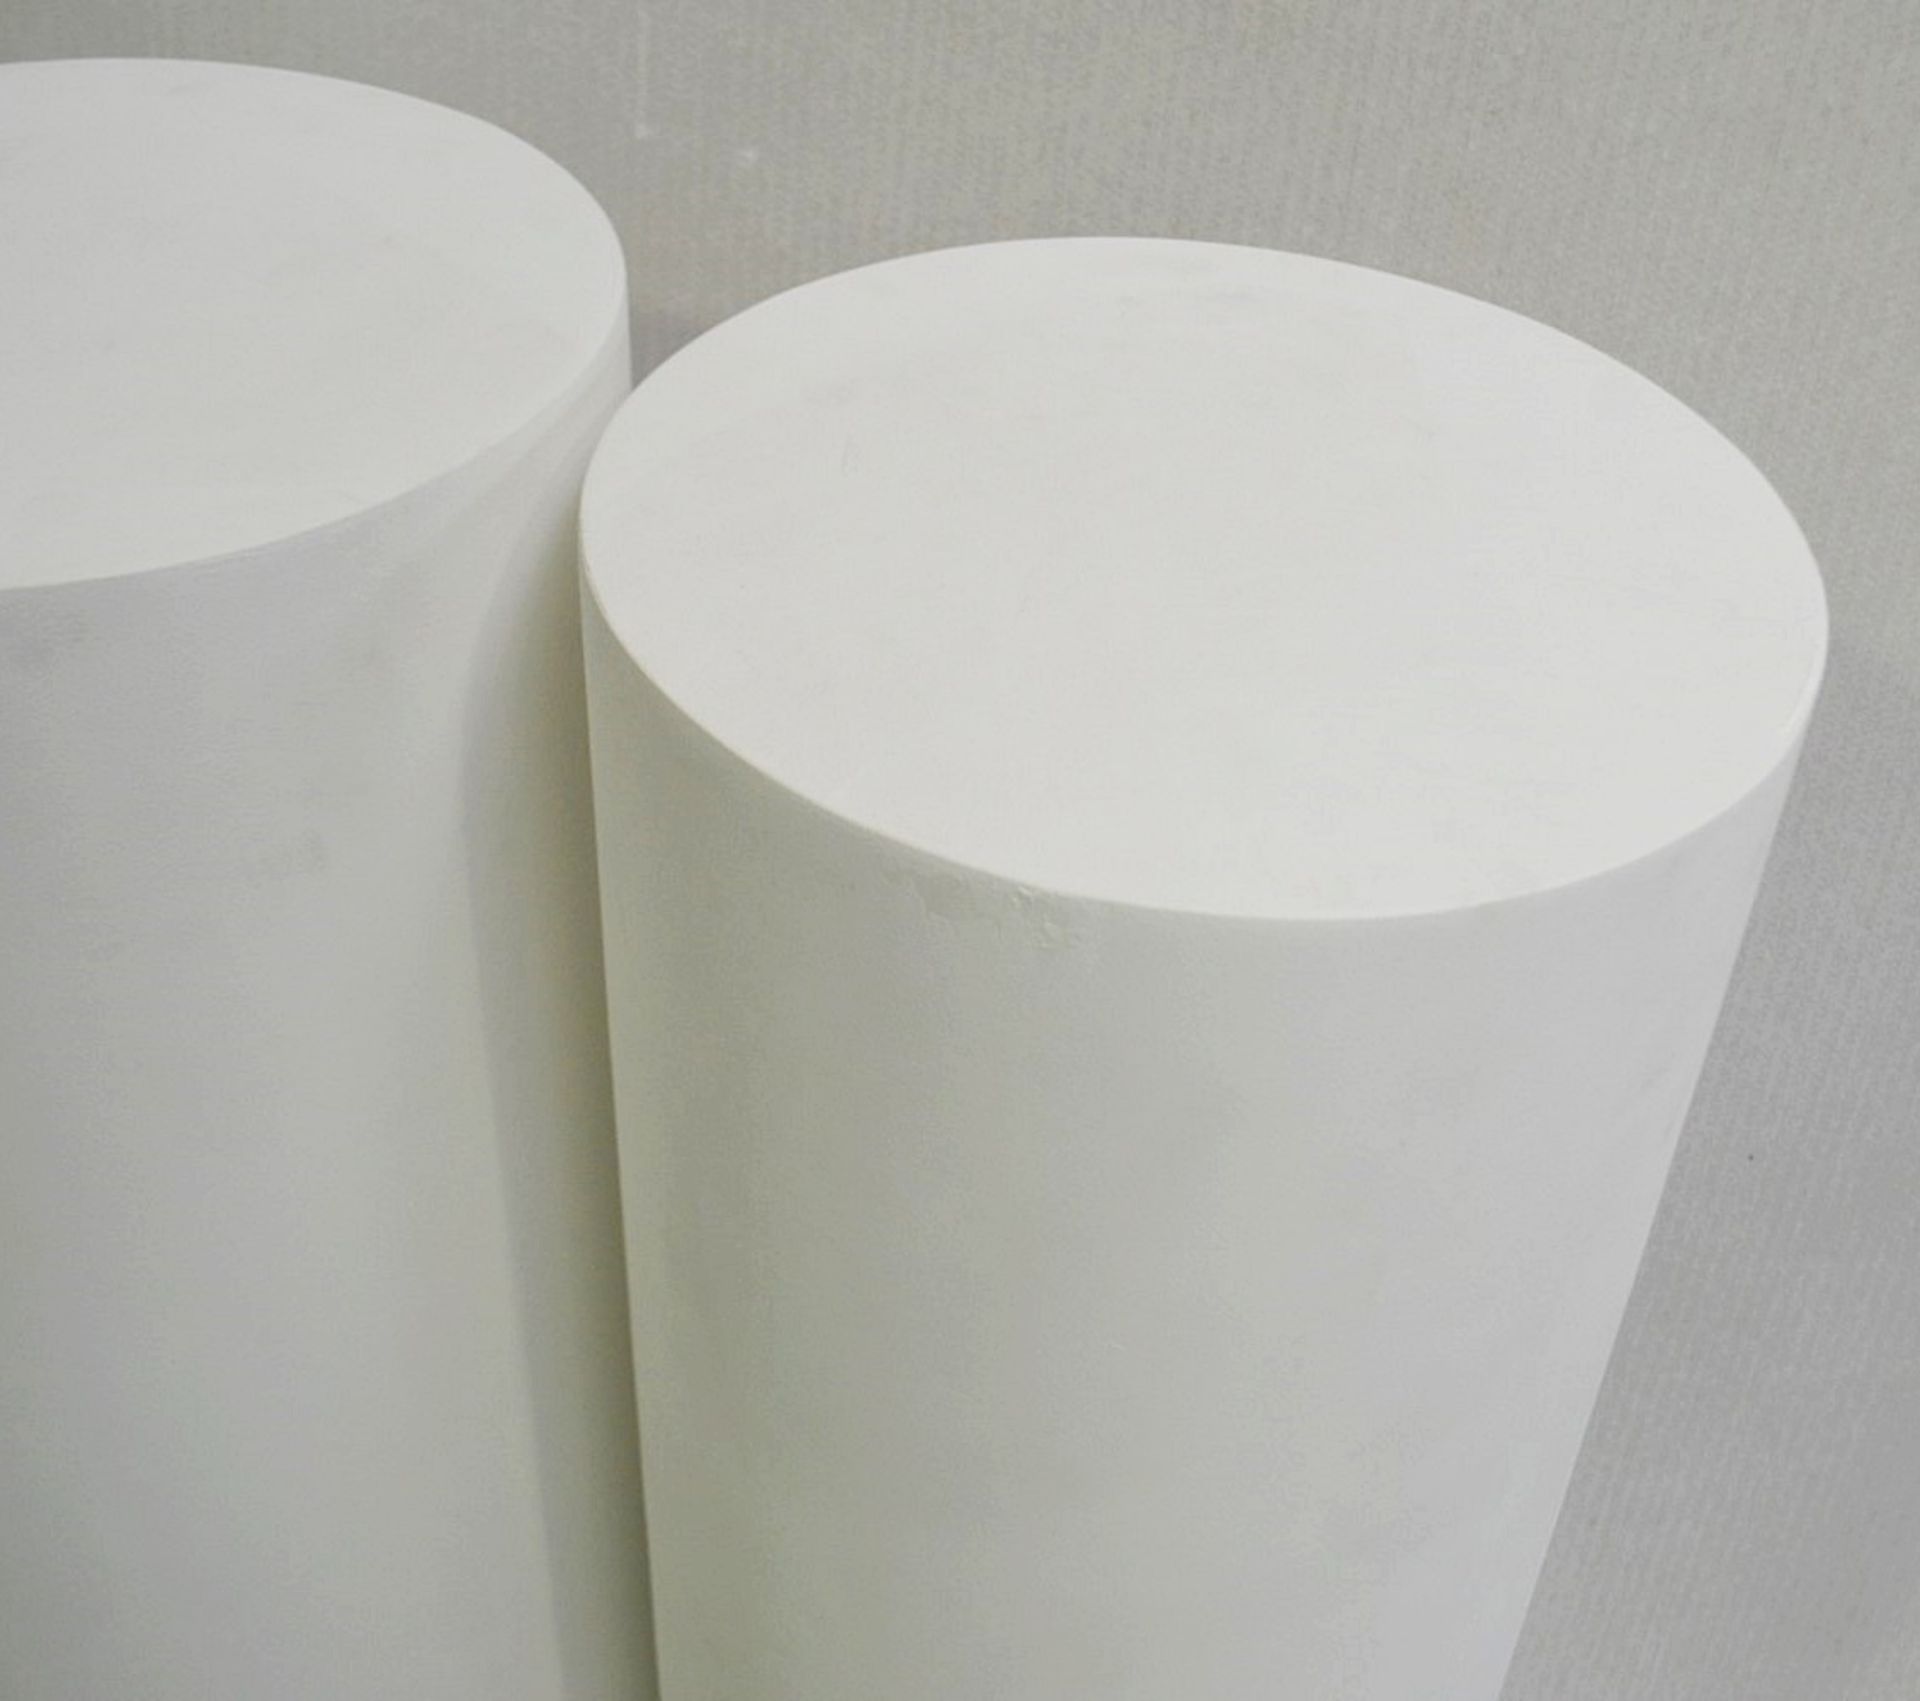 Set Of 3 x Cylinder 1-Metre Tall Retail Shop Display Plinths - Dimensions: Height 100cm / ø 36cm - Image 2 of 5